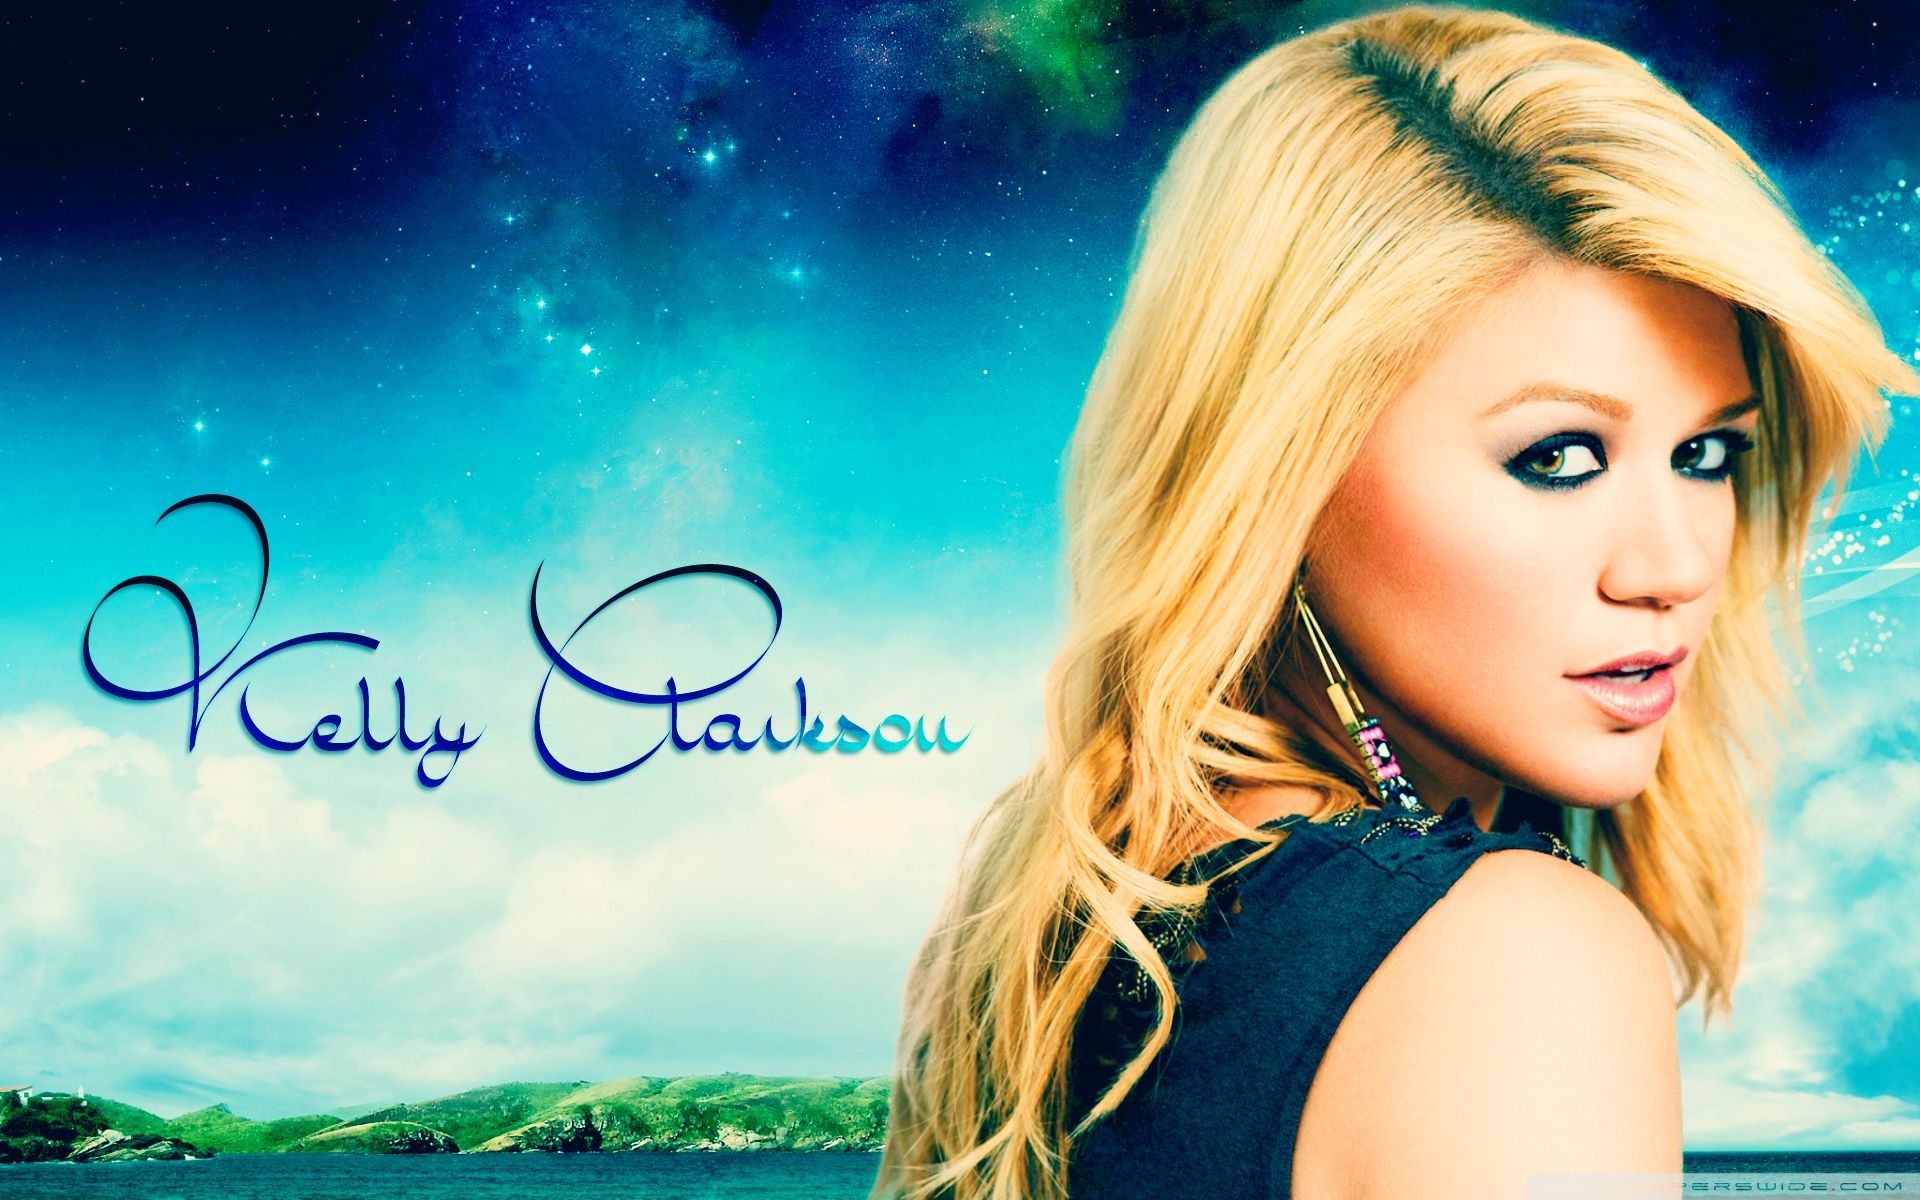 Kelly Clarkson Wallpapers.